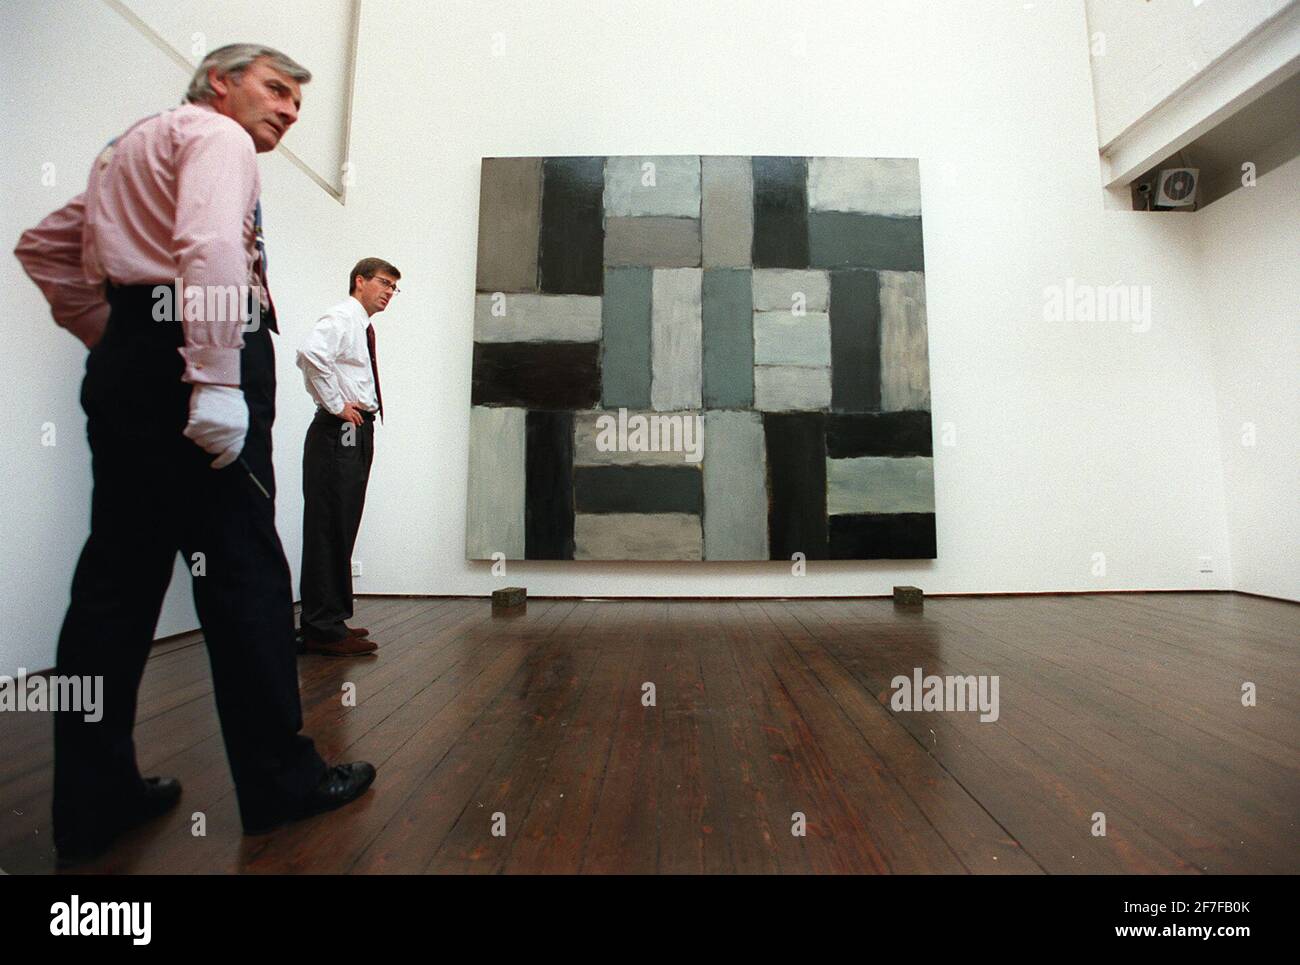 THE WORK OF SEAN SCULLY ENTITLED 'COYOTE' HAVING JUST BEING HUNG AT THE TIMOTHY TAYLOR GALLERY IN BRUTON PLACE, W1.7 September 2000 PHOTO ANDY PARADISE Stock Photo